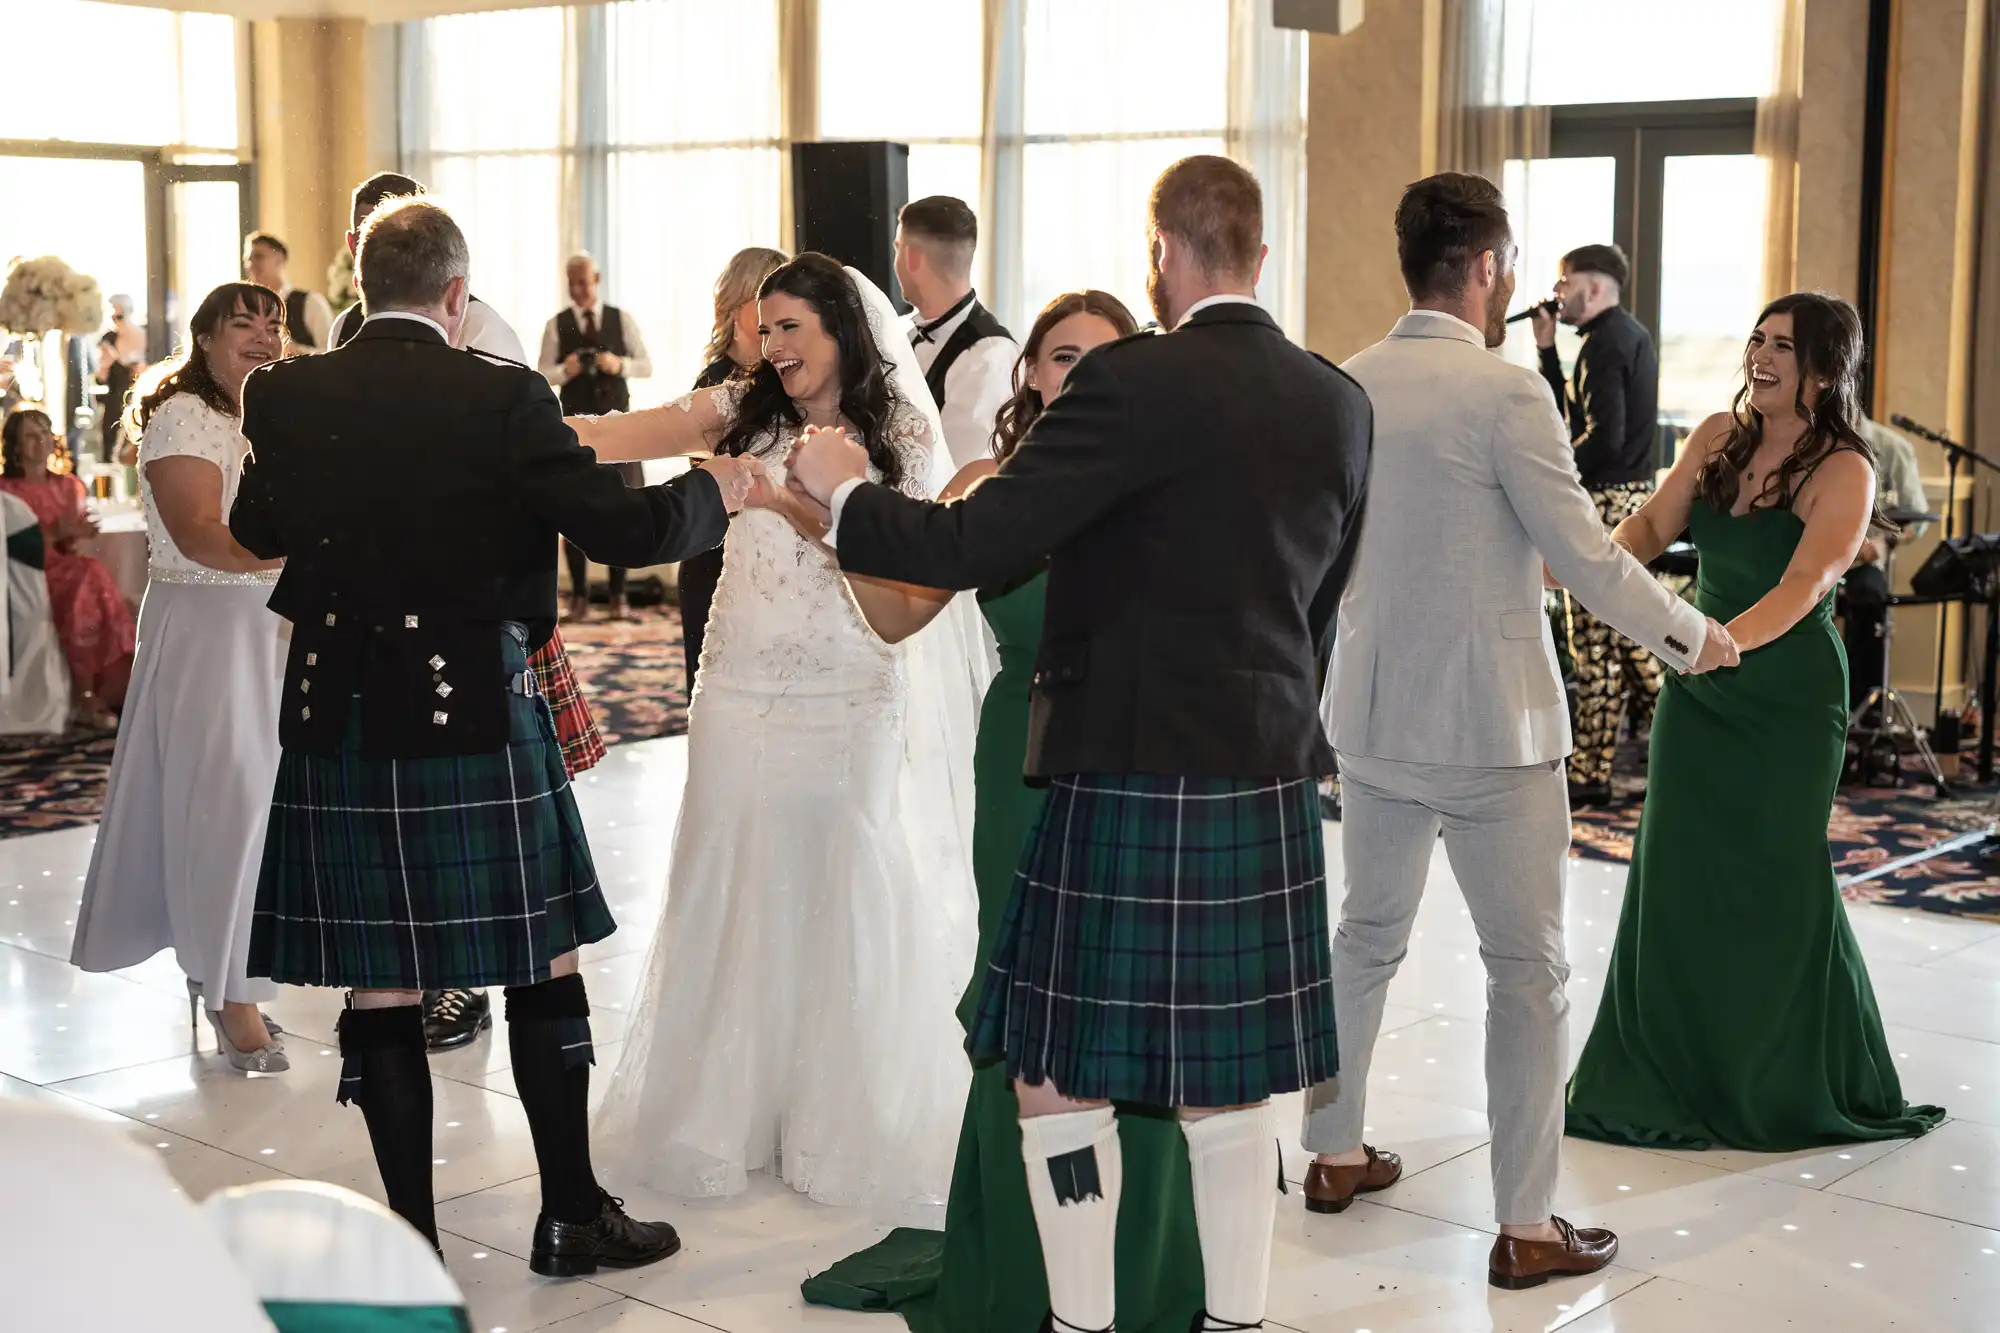 A bride and groom joyfully dance surrounded by guests, some wearing Scottish kilts, in an elegant hall with large windows.